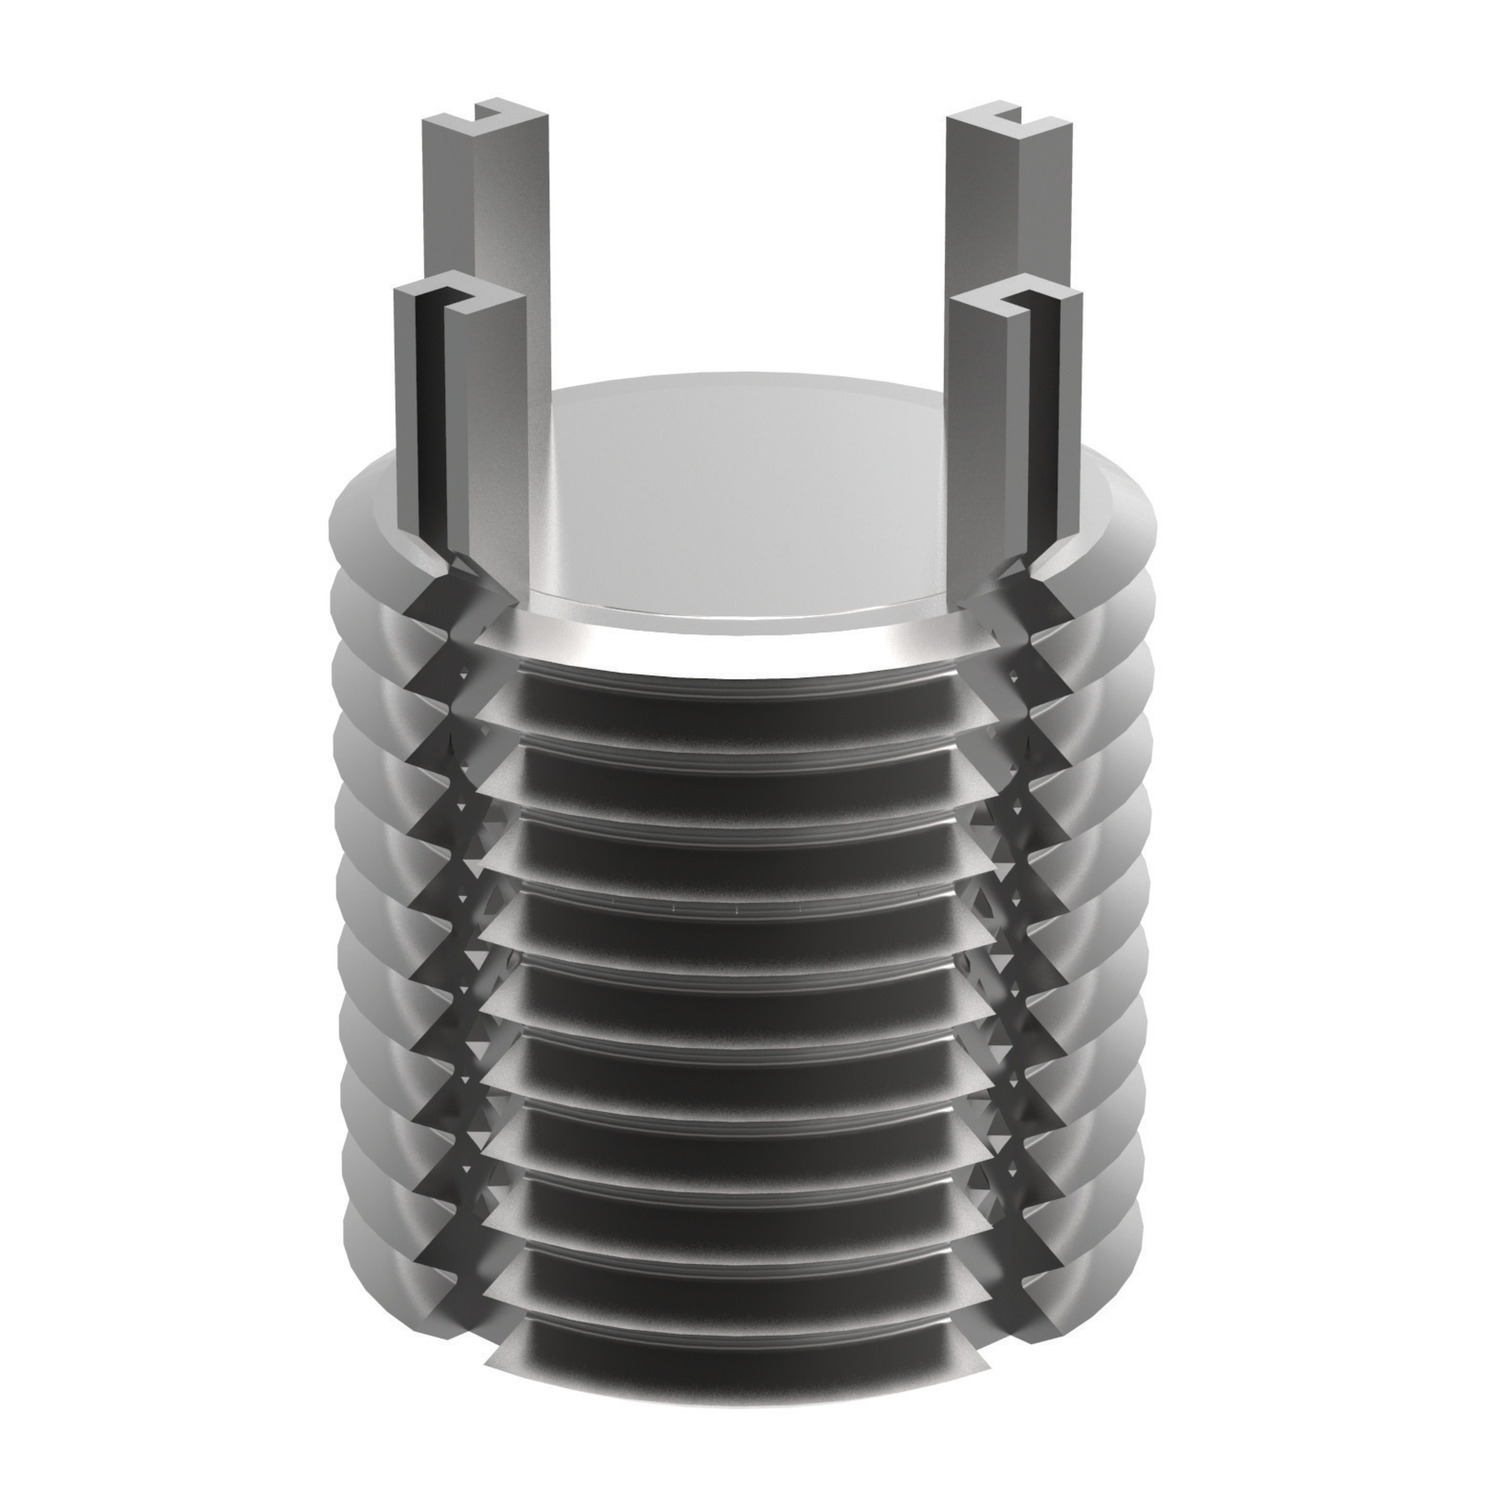 Threaded Insert - Solid - Metric For the plugging of threads and other unused holes, solid inserts provide a quick and easy to install solution. Metric, stainless steel.